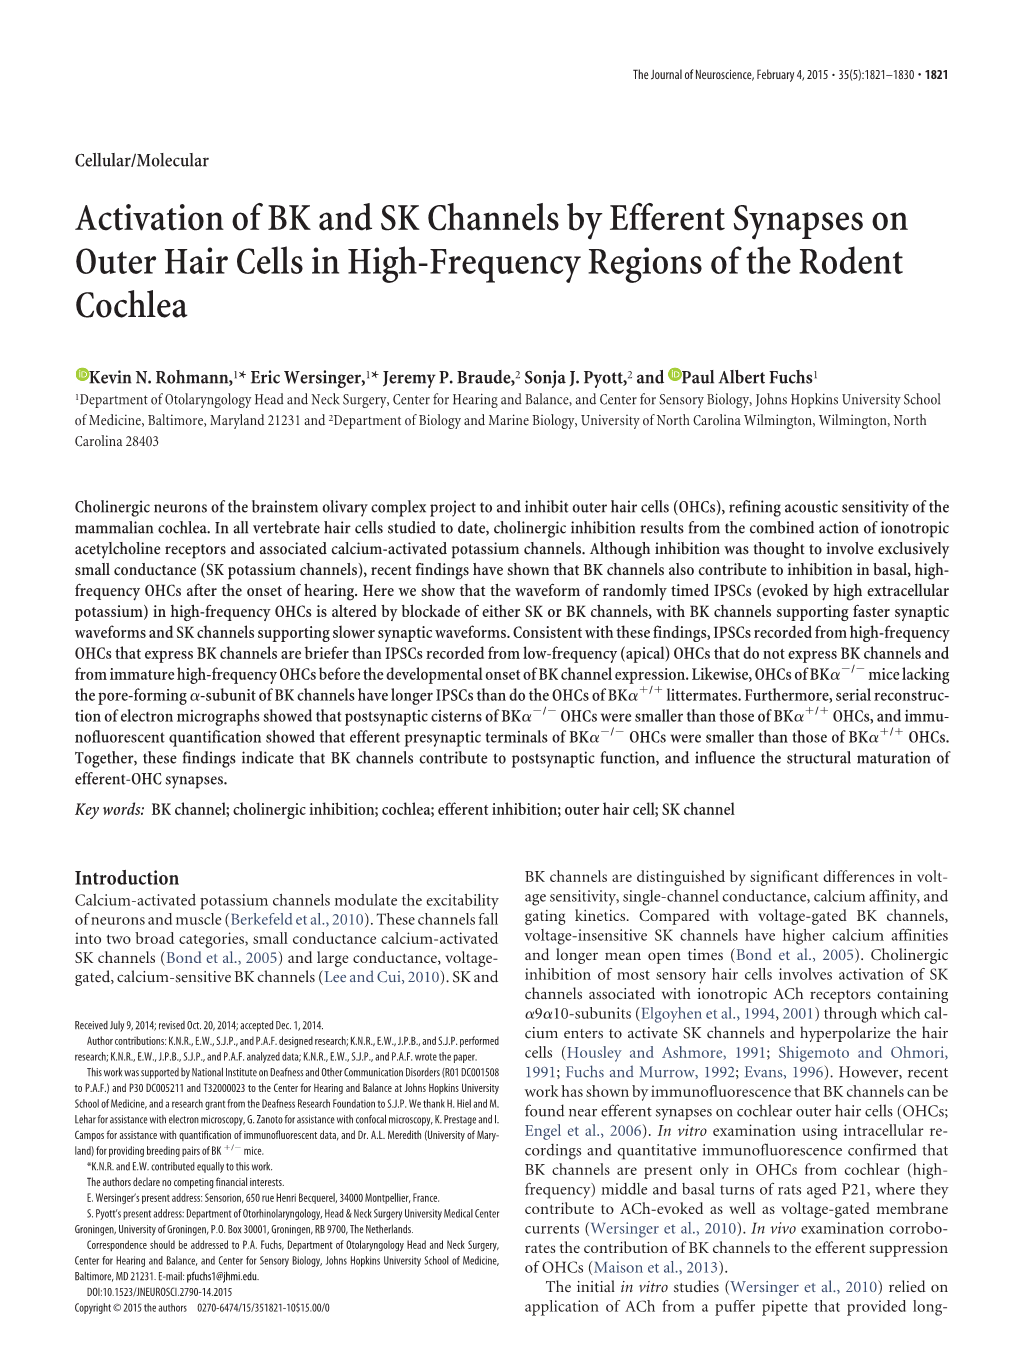 Activation of BK and SK Channels by Efferent Synapses on Outer Hair Cells in High-Frequency Regions of the Rodent Cochlea